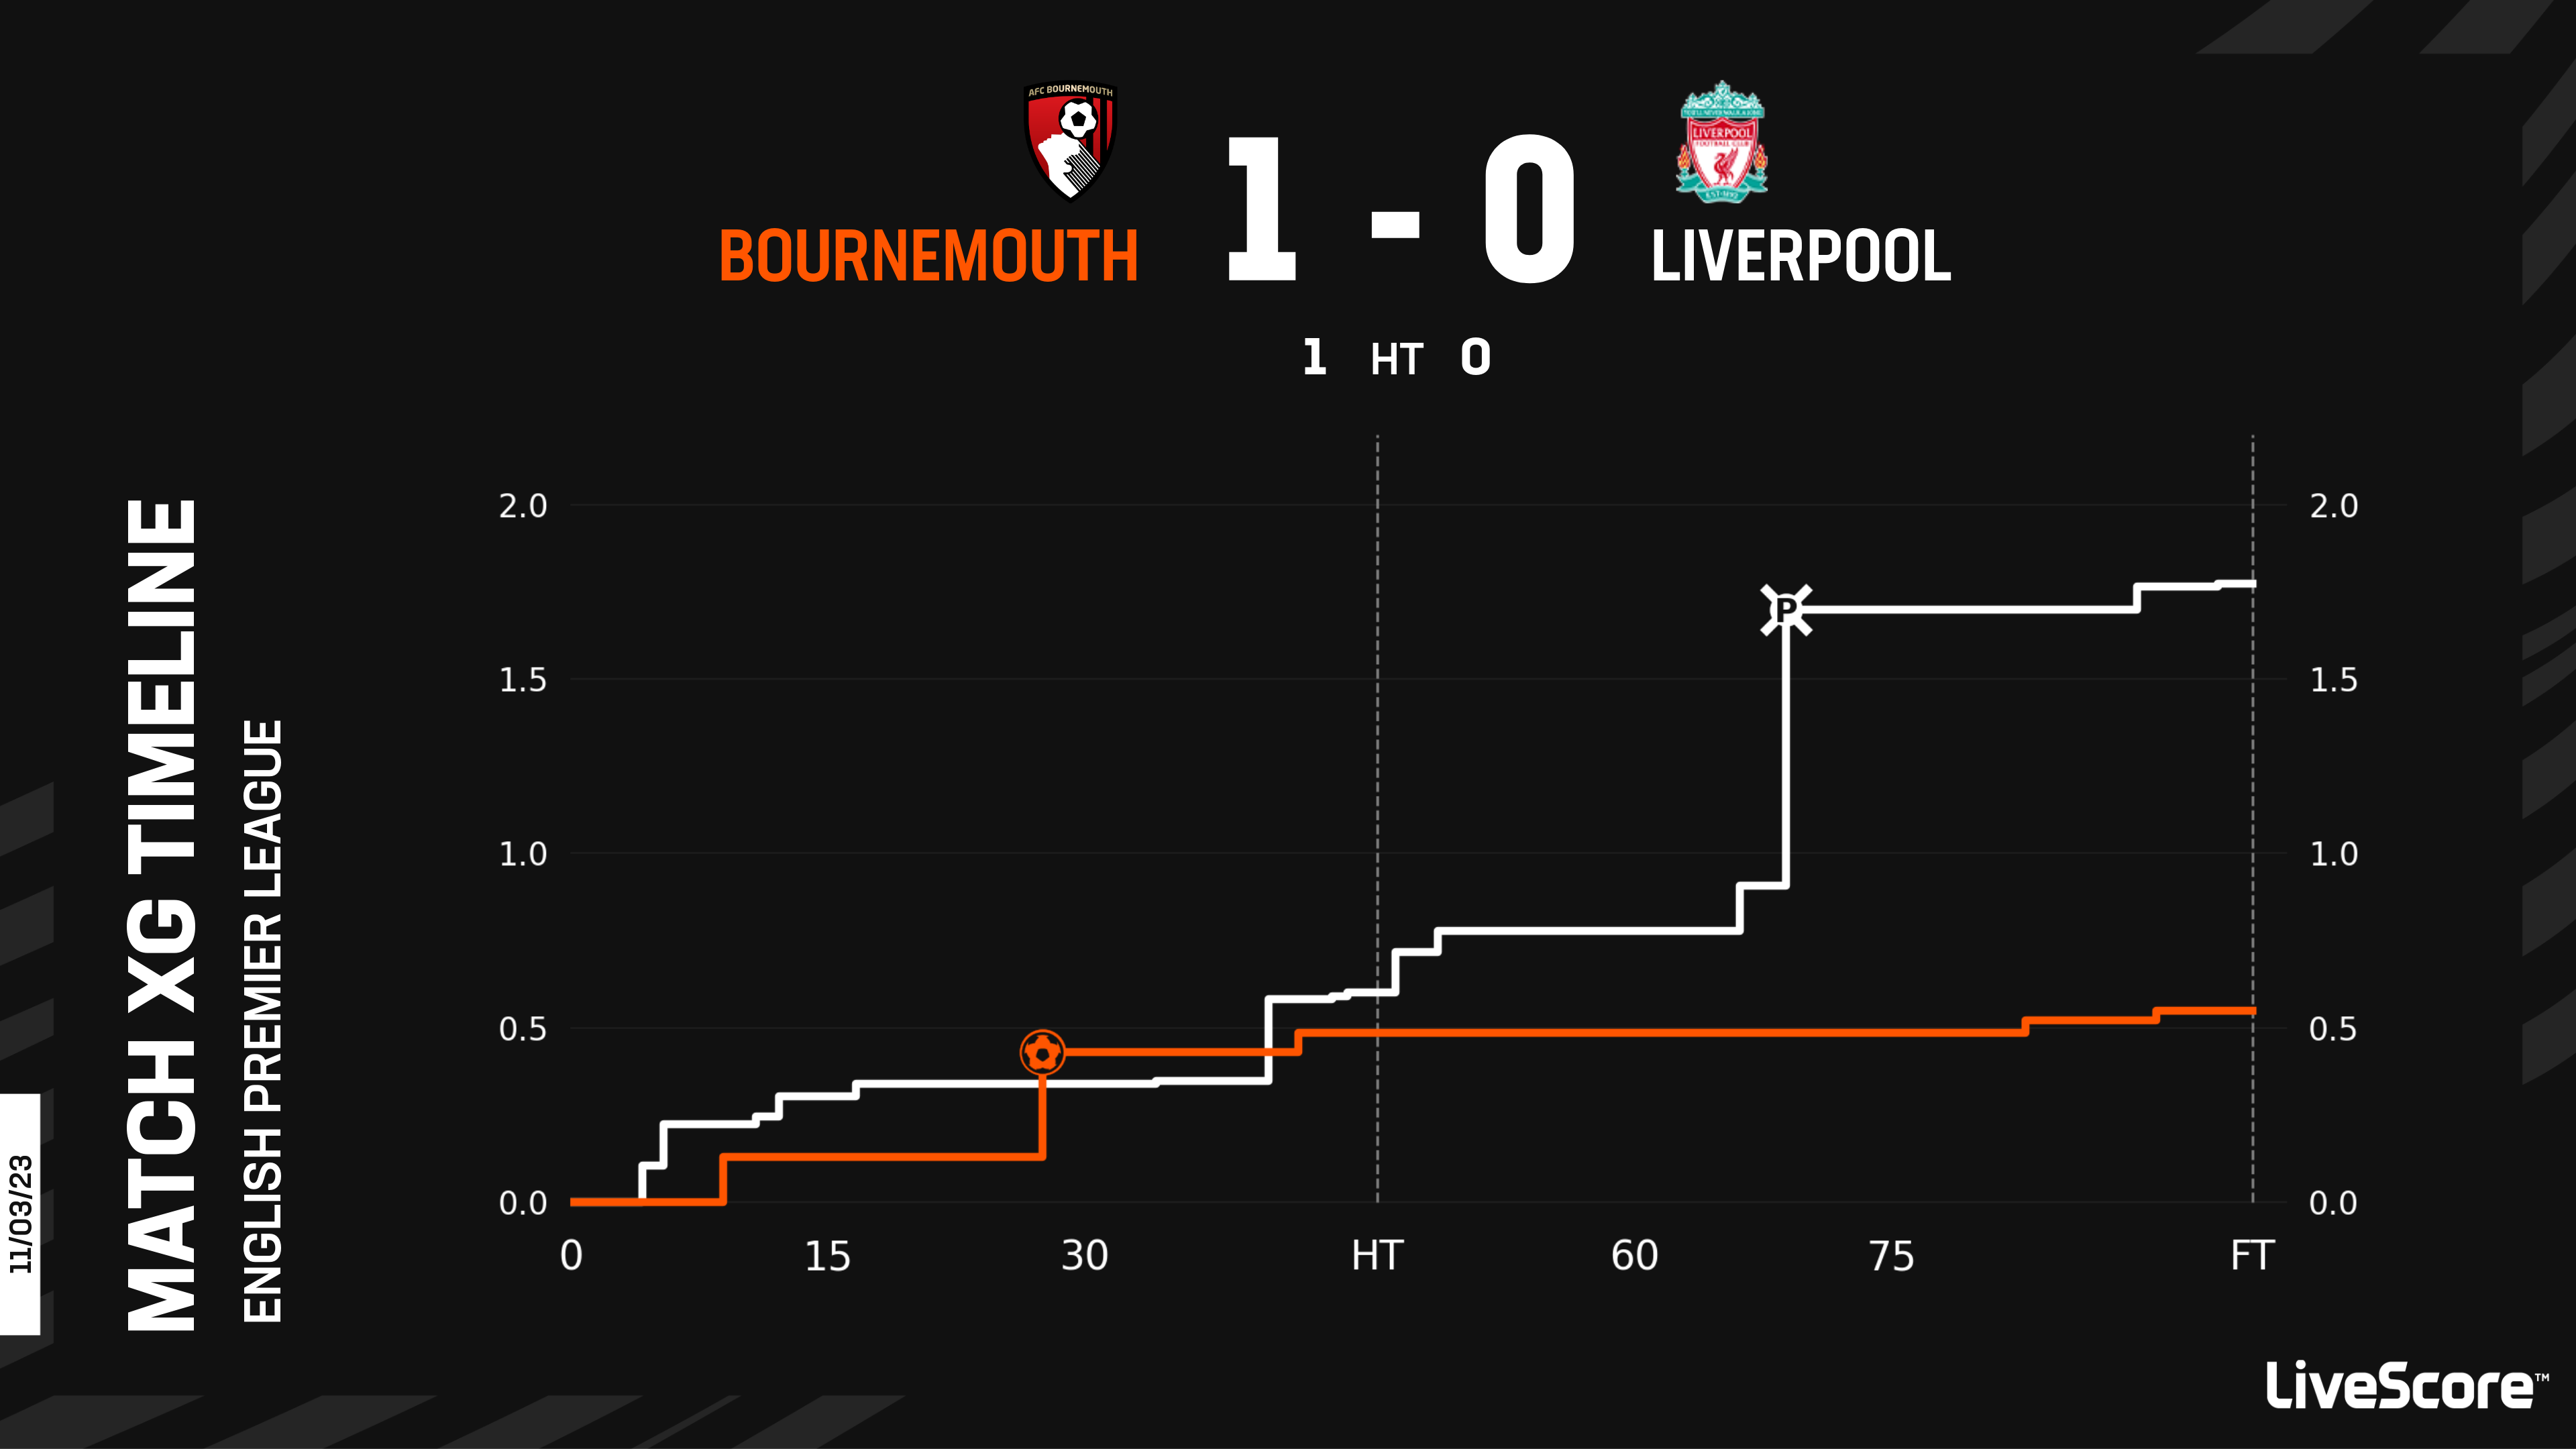 Bournemouth rode their luck en route to a massive win over Liverpool last weekend